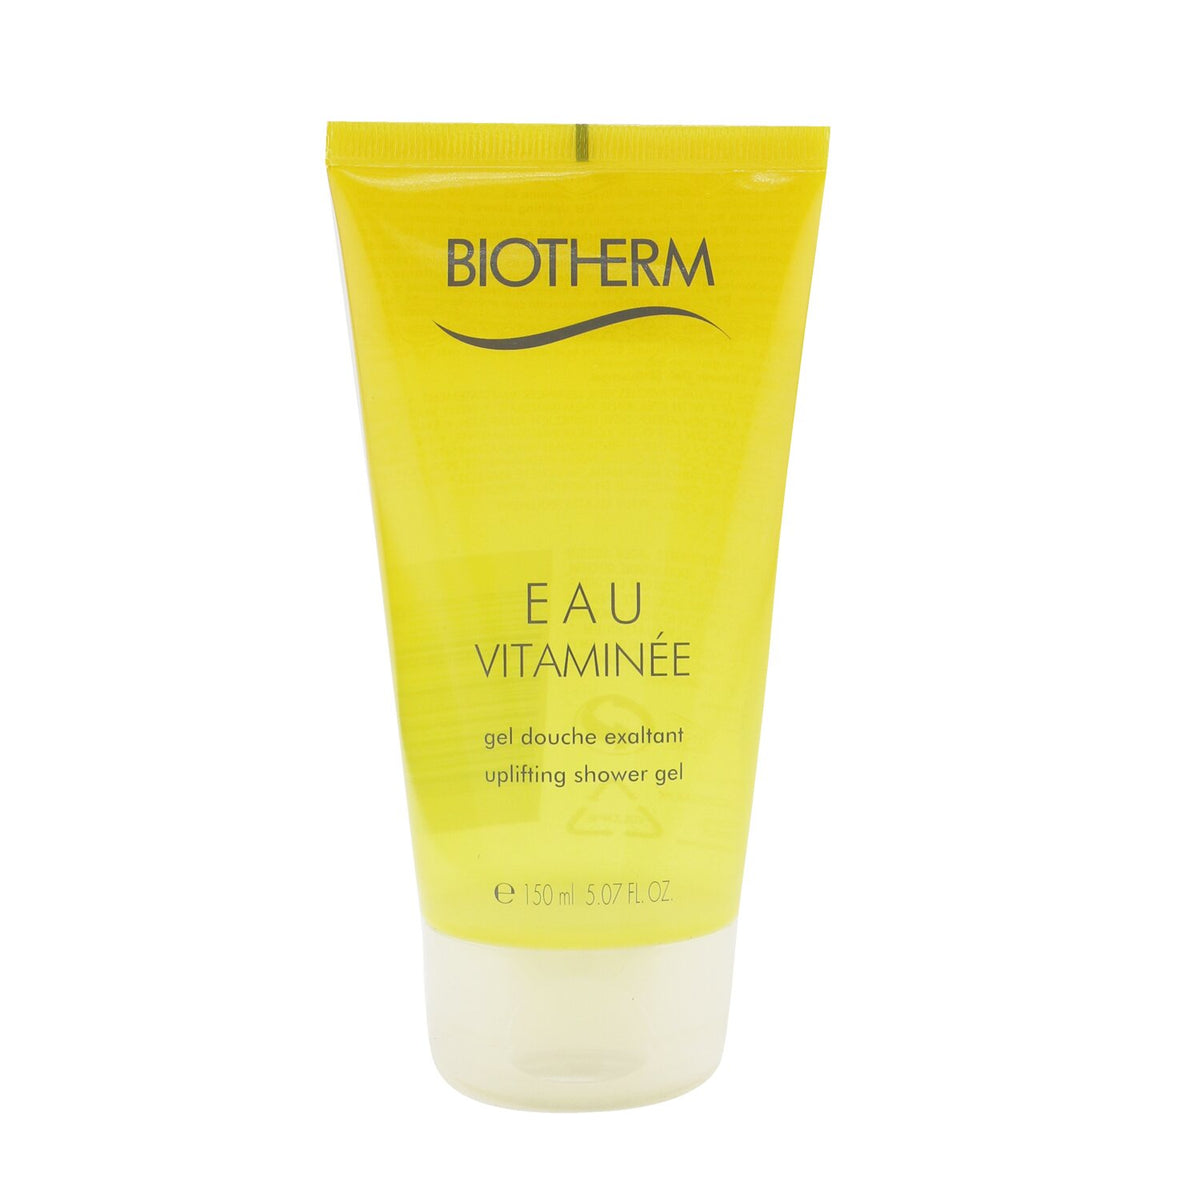 Eau Vitaminee Uplifting Shower for Sale | Biotherm, Skincare, Now – Author